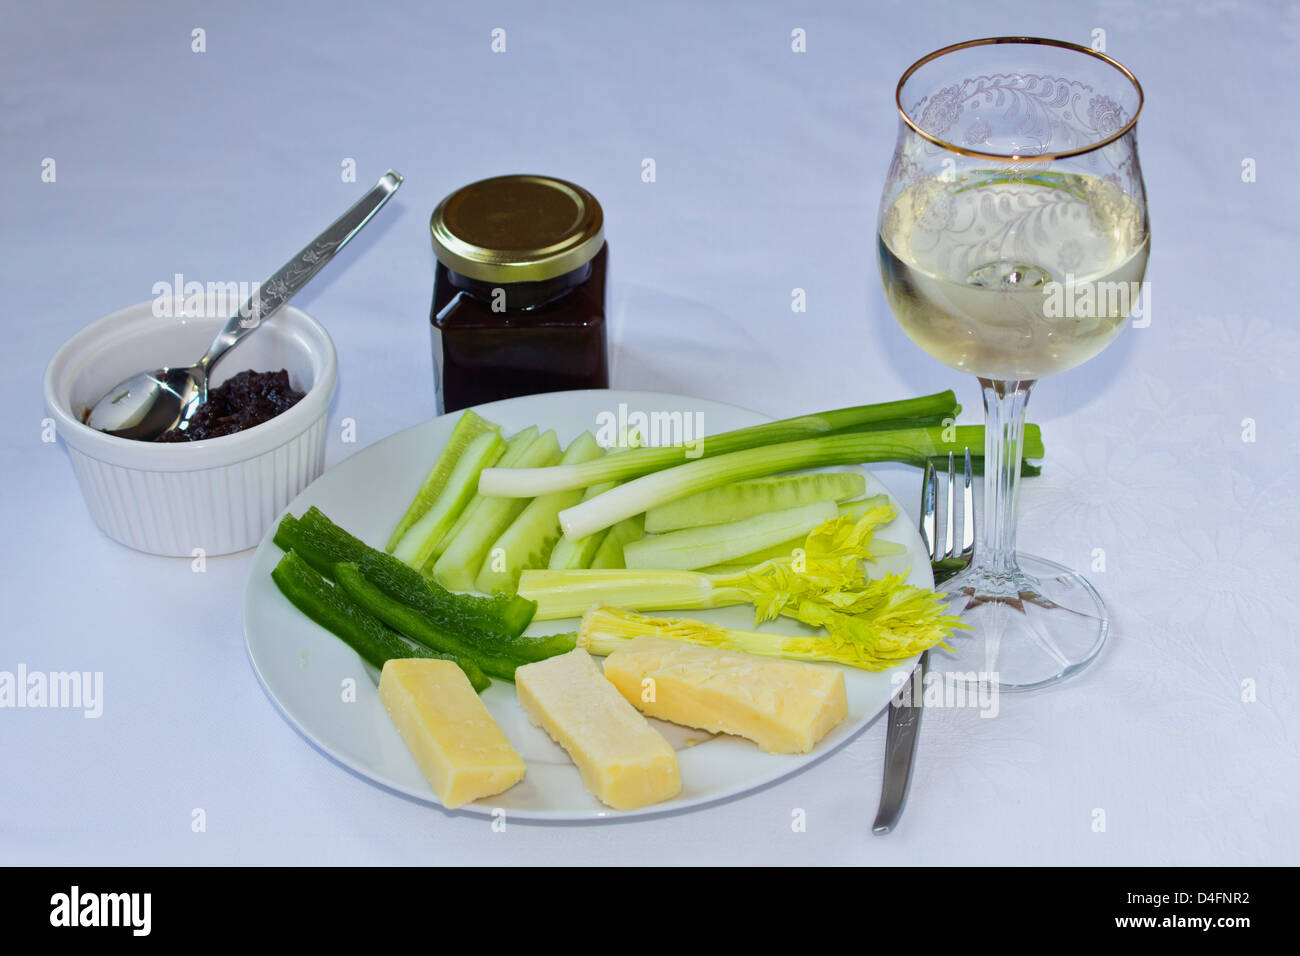 Cheese and vegetable snack with glass of wine Stock Photo